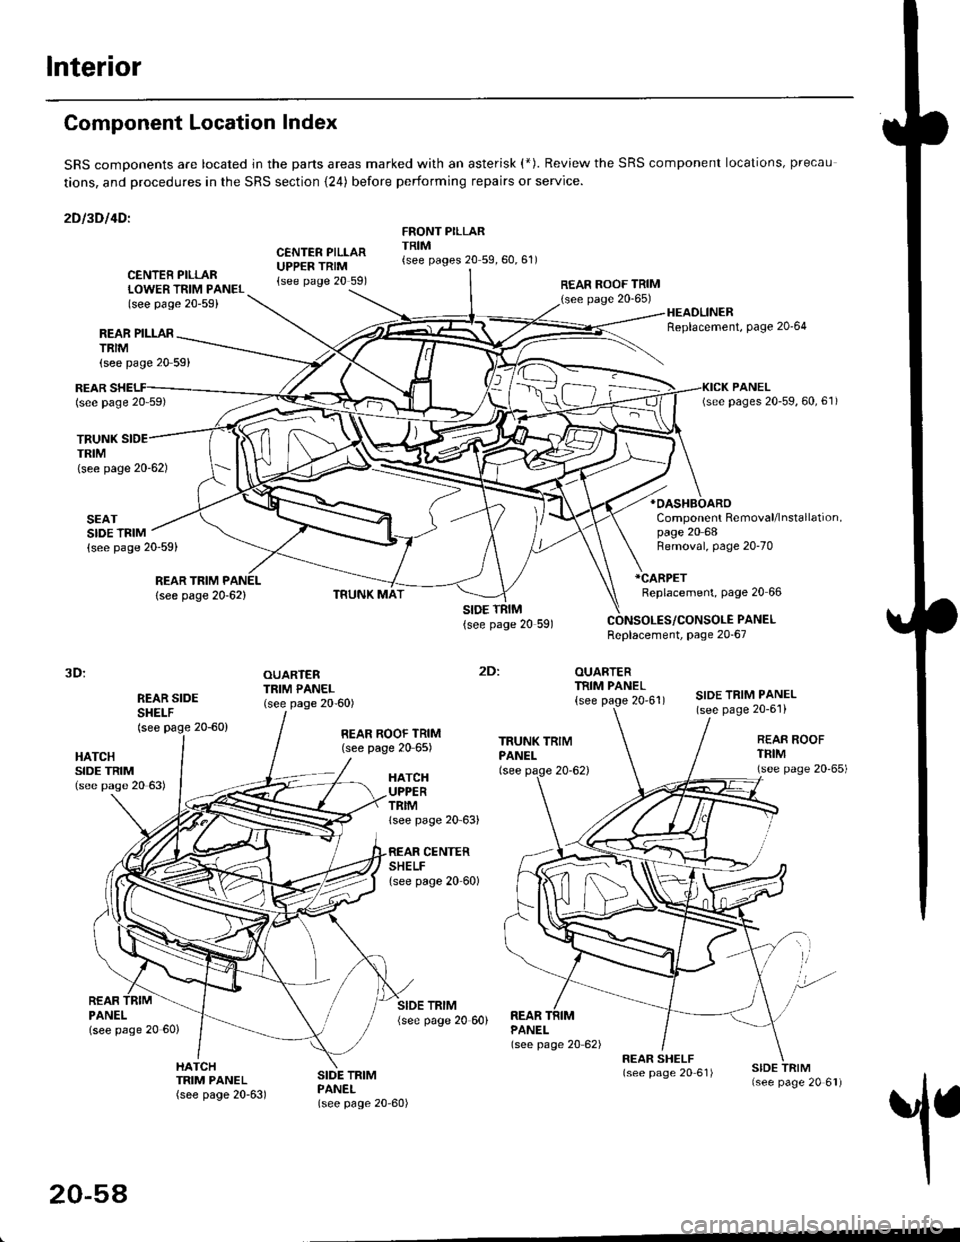 HONDA CIVIC 1996 6.G Workshop Manual Interior
Component Location Index
SRS comDonents are located jn the parts areas marked with an asterisk (*). Review the SRS component locations, precau
tions, and procedures in the SRS section {24) be